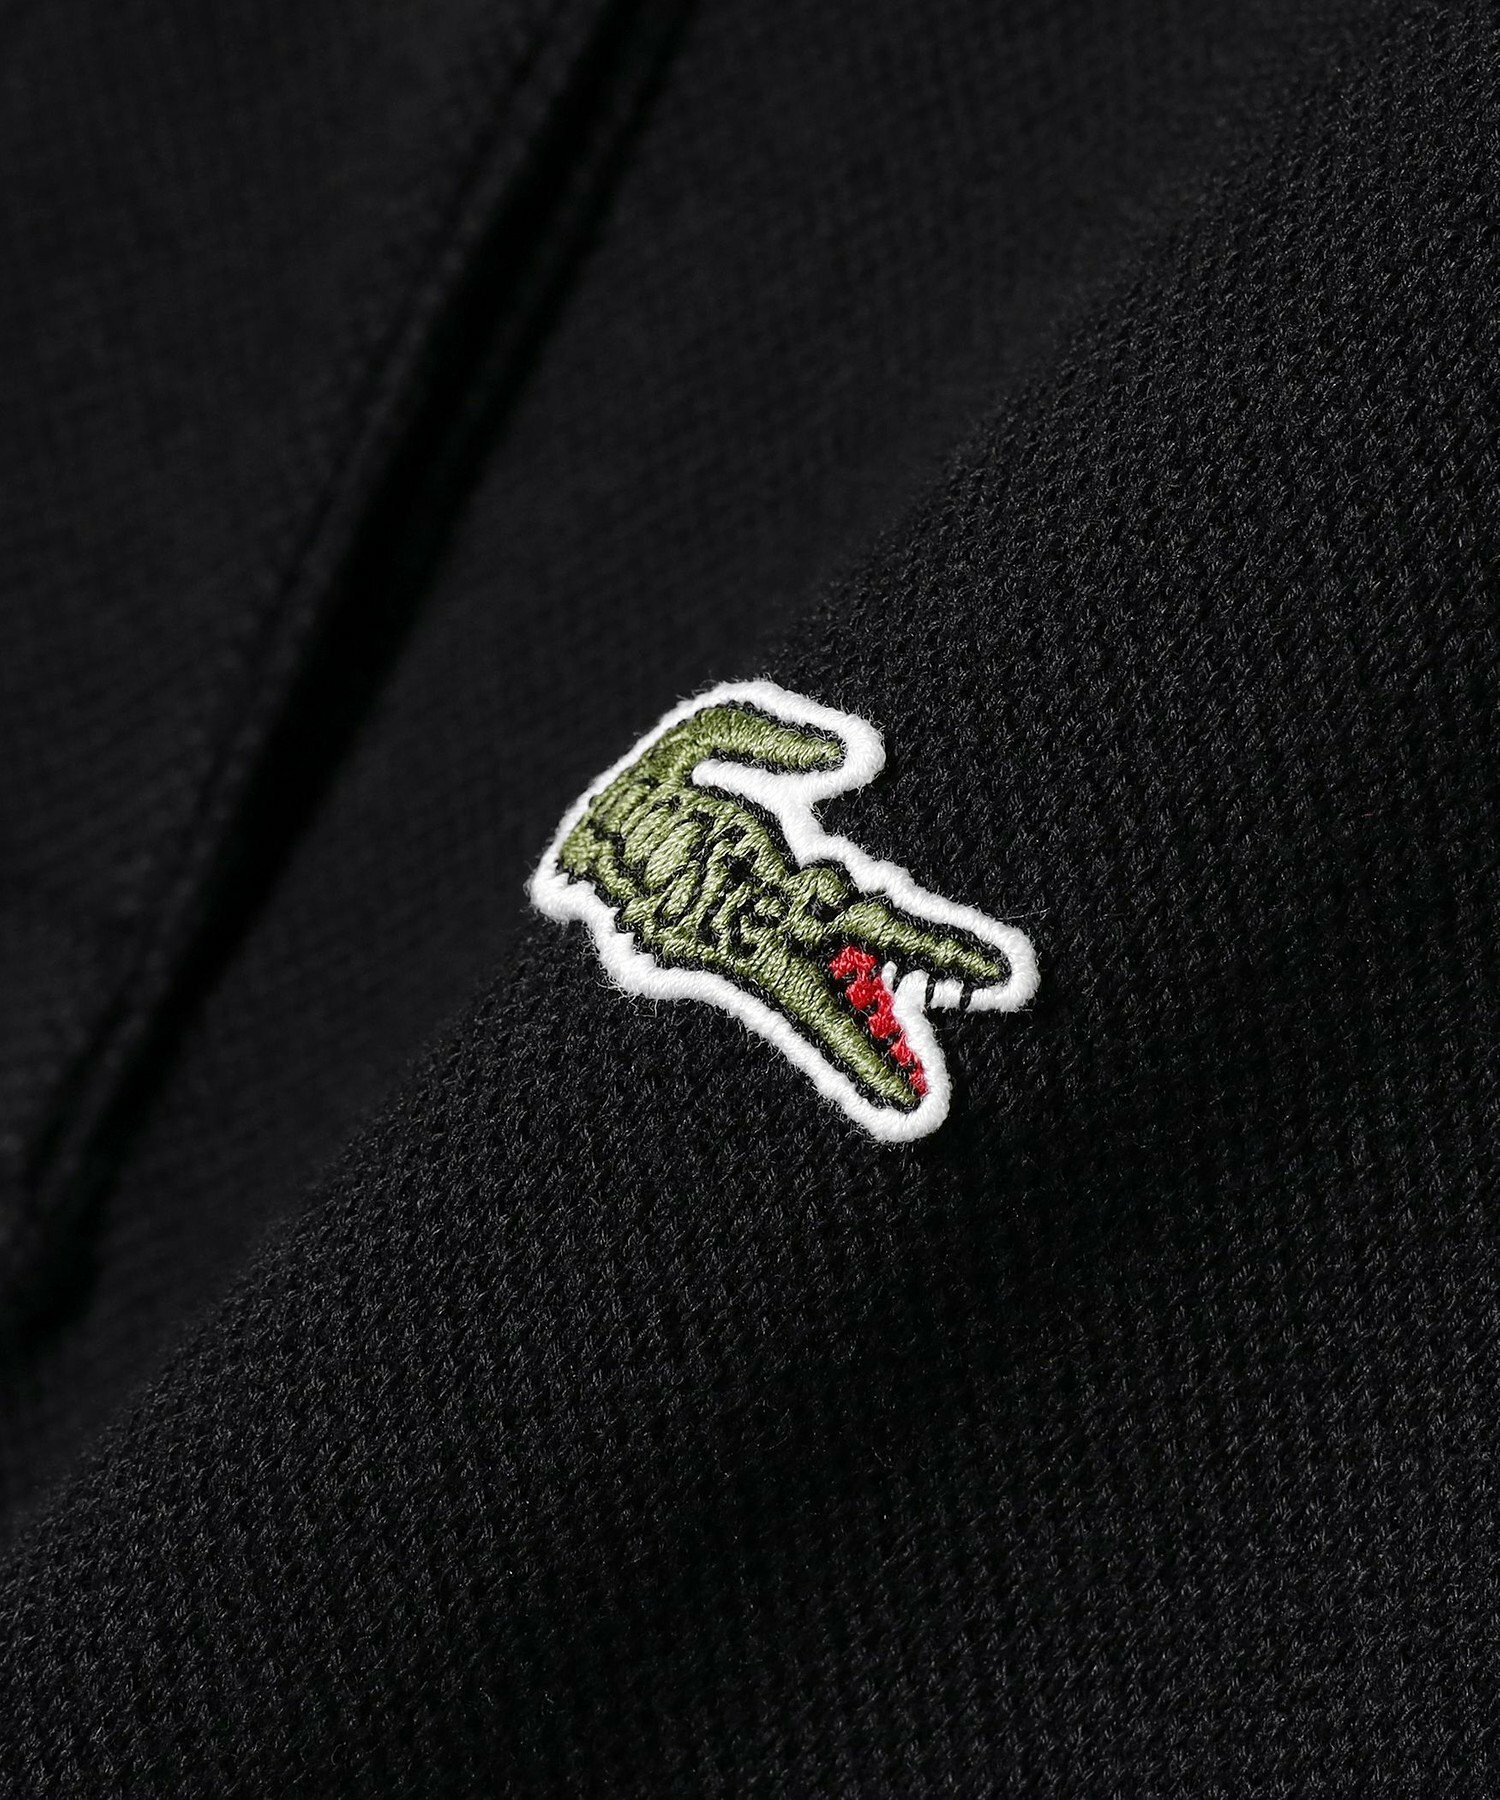 LACOSTE for BEAMS BOY  / 別注 ヘビーピケ ポロシャツ 24SS イージーケア